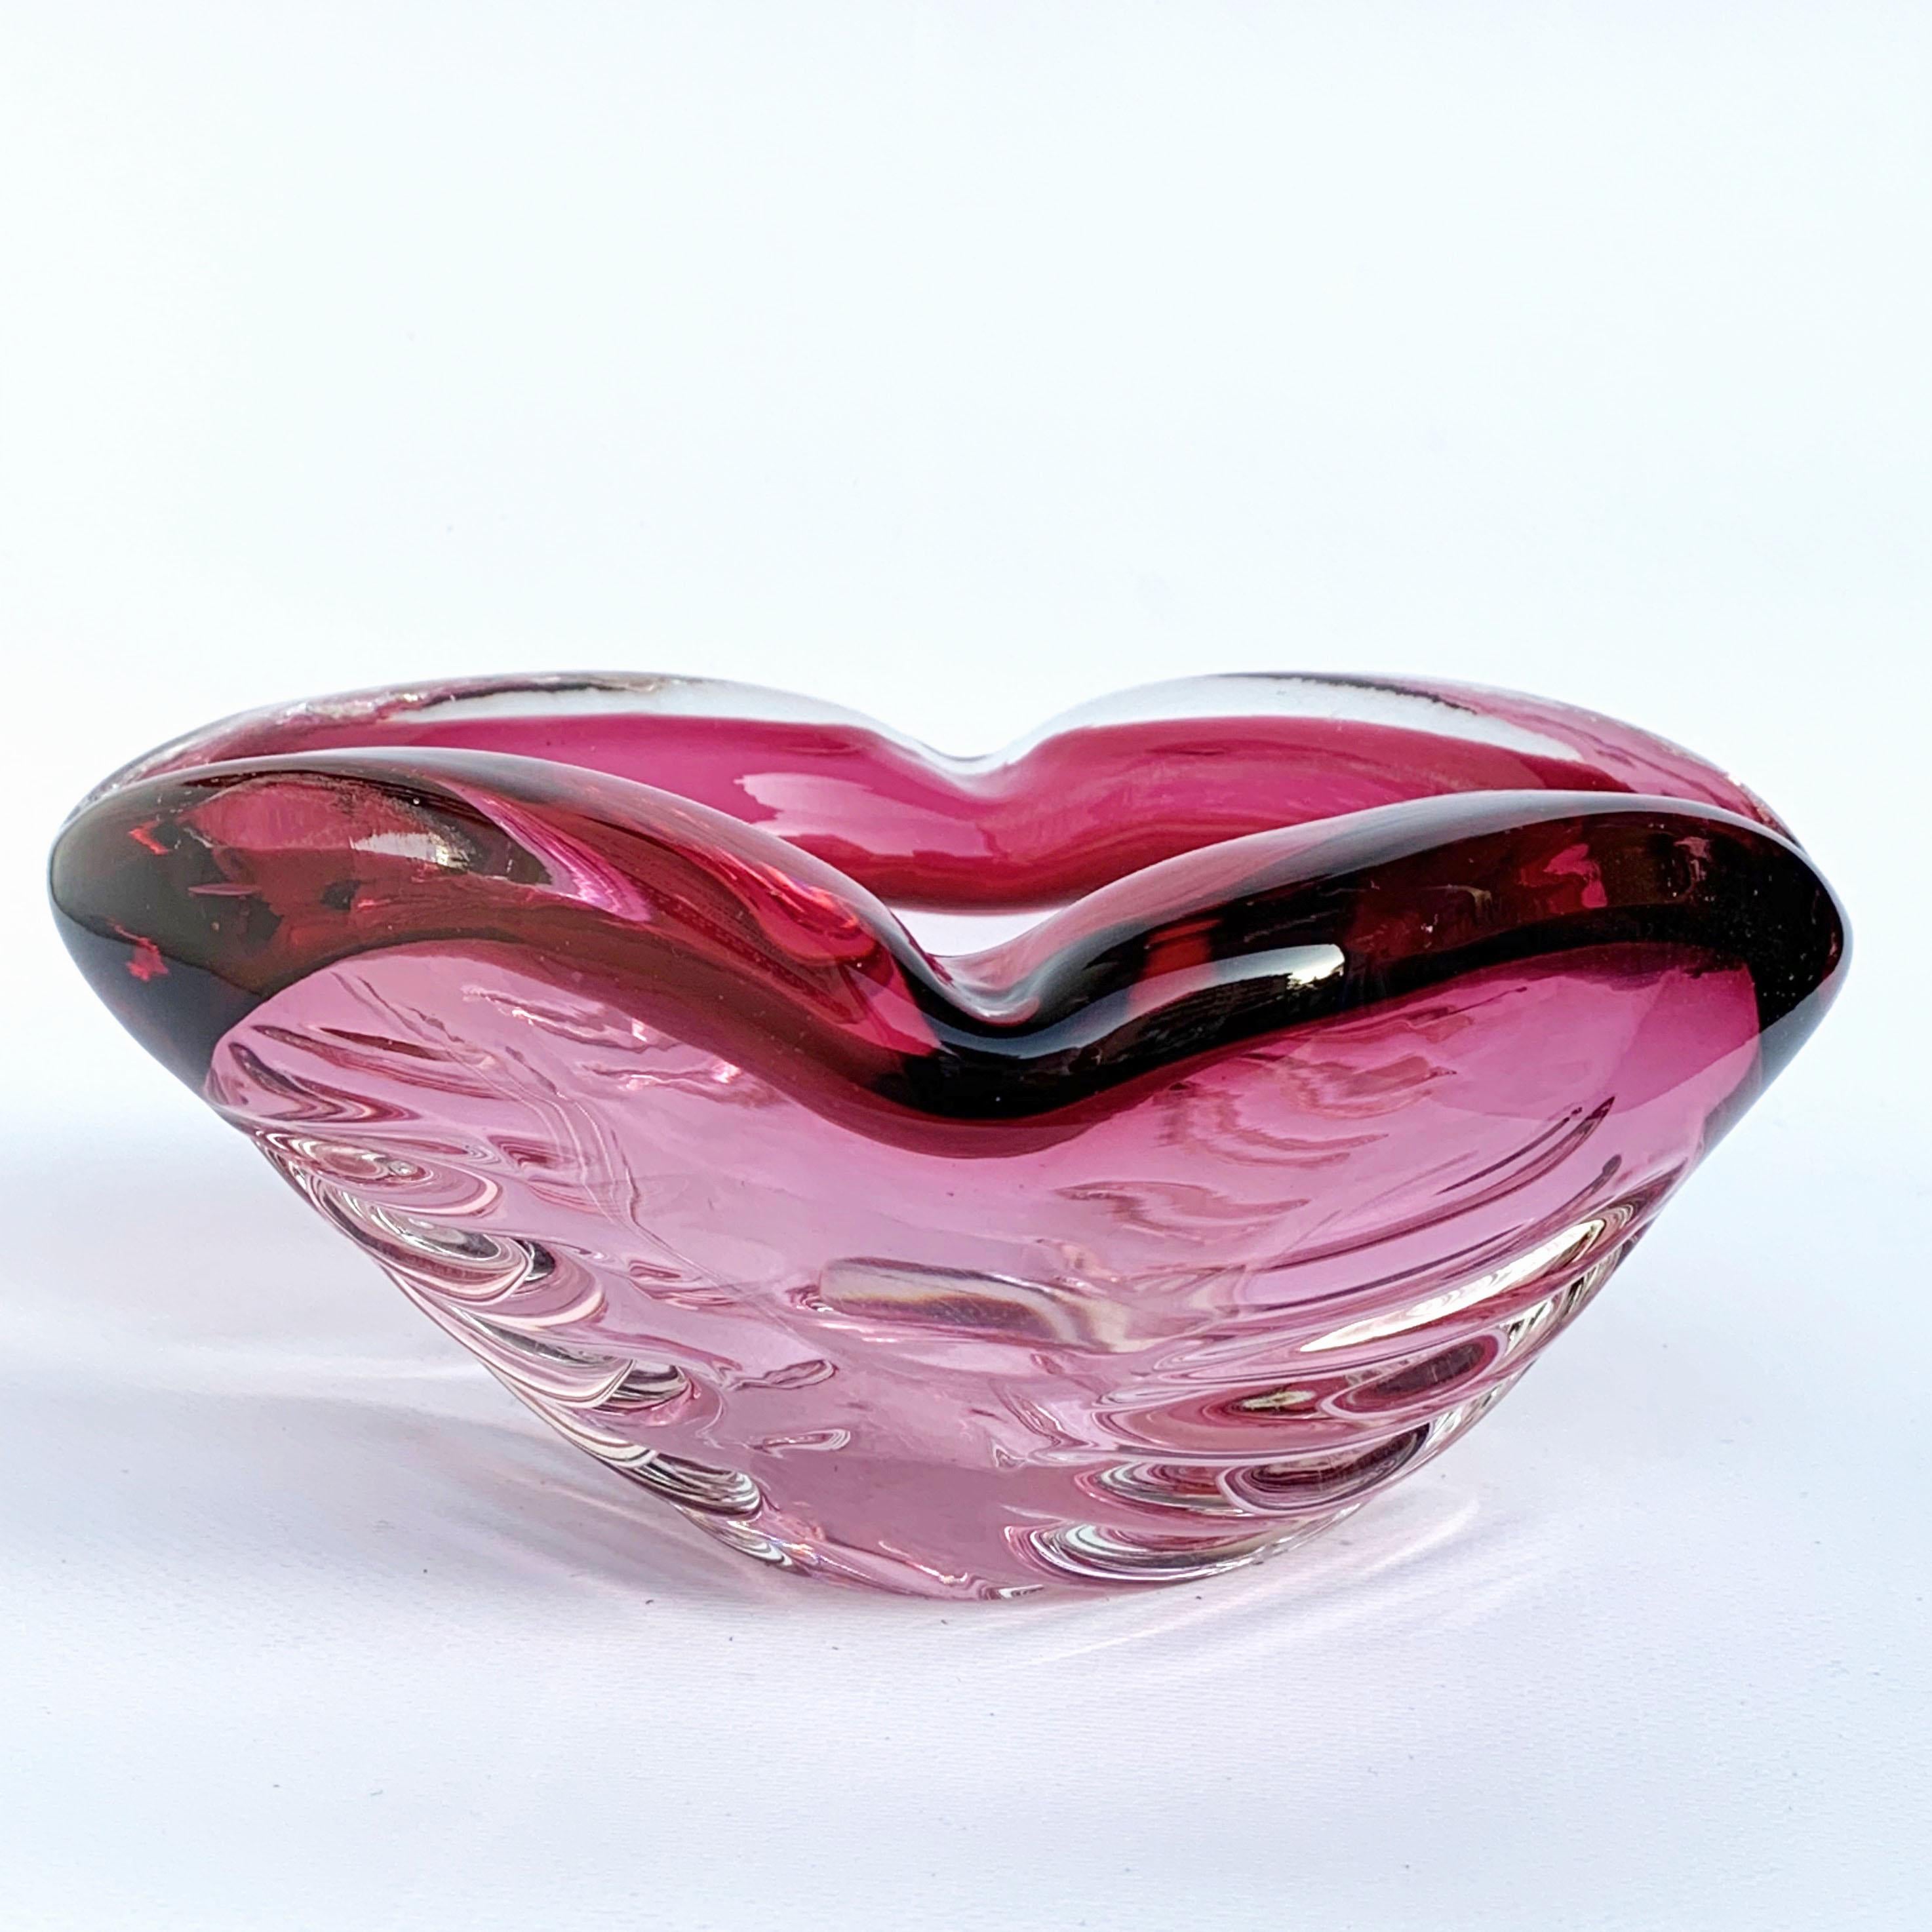 Attributed to Seguso handblown pink, purple and blue Sommerso Murano glass bowl, Italy, 1960s.
No chipping.